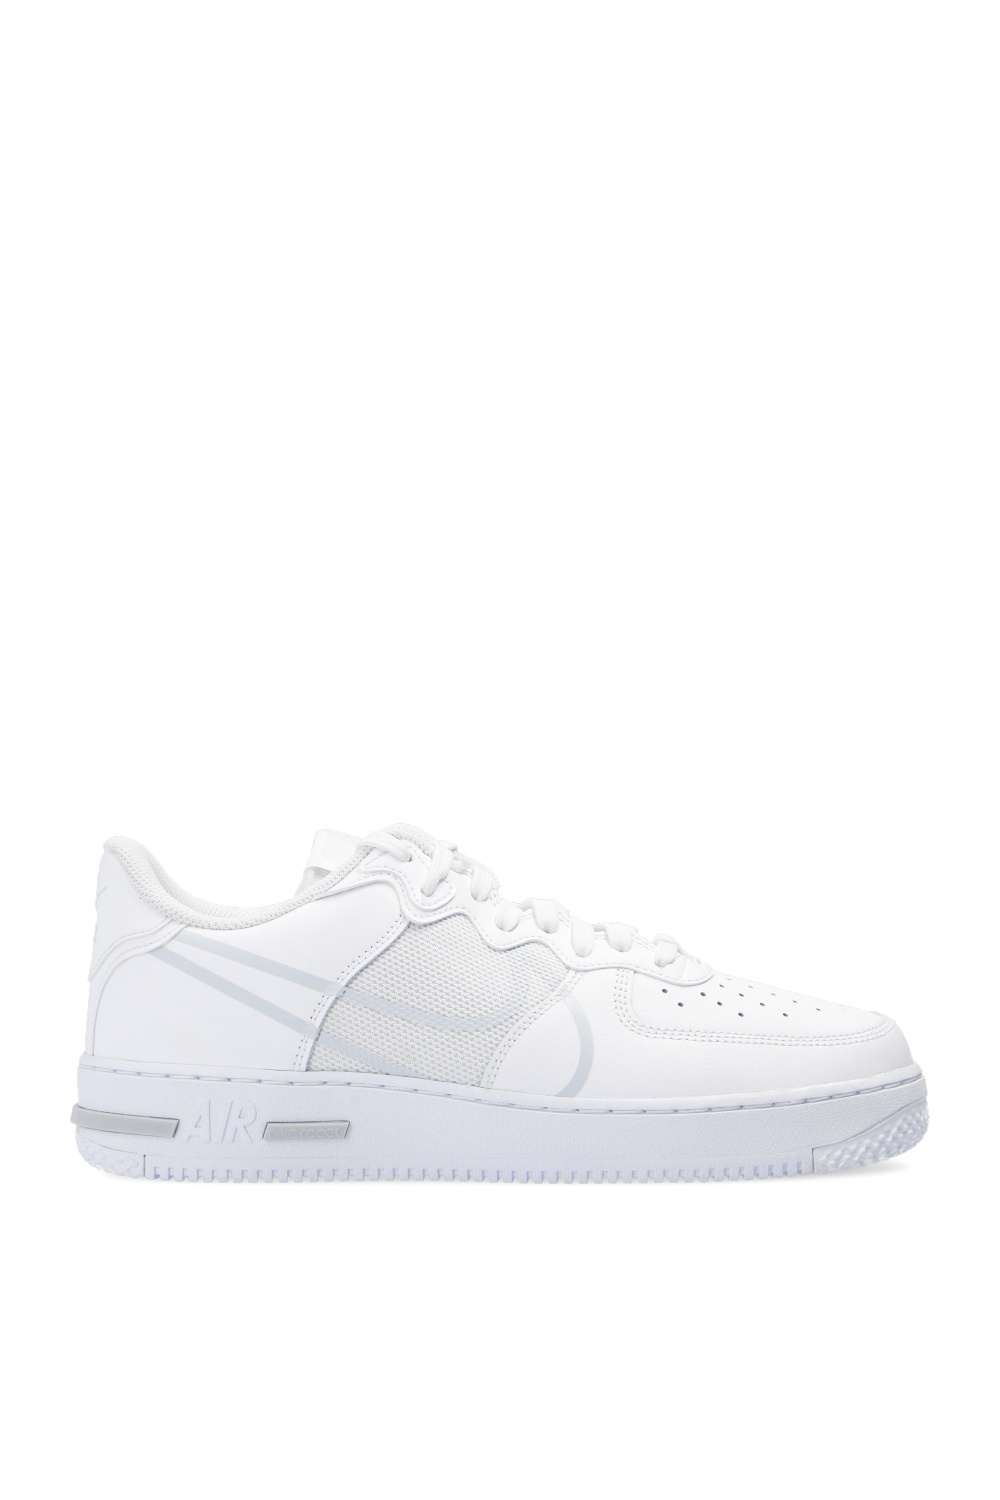 so There is a trend Proficiency White 'Air Force 1 React' sneakers Nike - Vitkac Canada